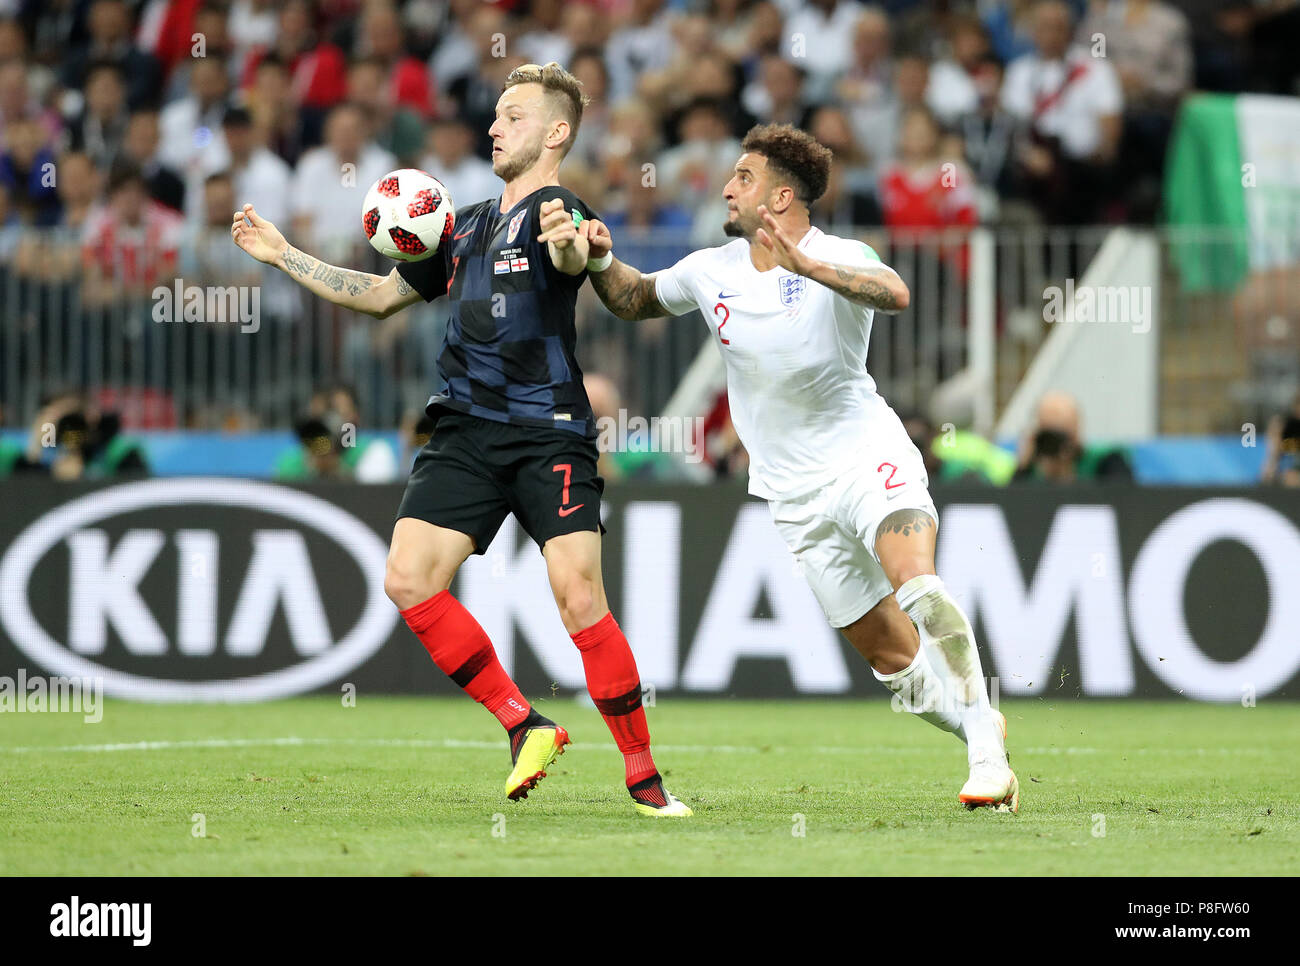 Croatia's Ivan Rakitic and England's Kyle Walker battle for the ball during the FIFA World Cup, Semi Final match at the Luzhniki Stadium, Moscow. PRESS ASSOCIATION Photo. Picture date: Wednesday July 11, 2018. See PA story WORLDCUP Croatia. Photo credit should read: Owen Humphreys/PA Wire. Stock Photo